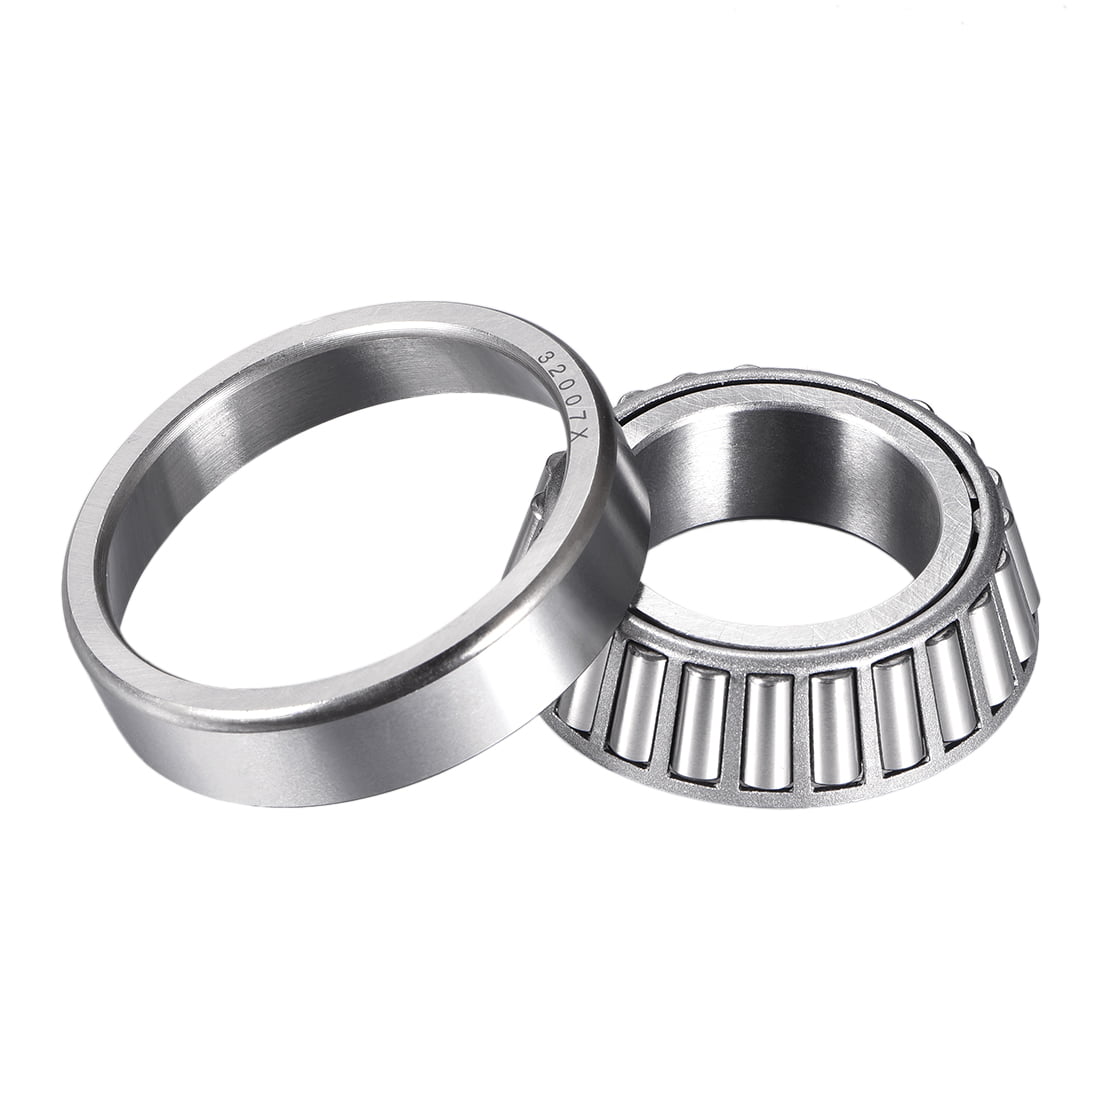 35mm Bore 62mm OD 18mm 32007X Tapered Roller Bearing Cone/Race Set